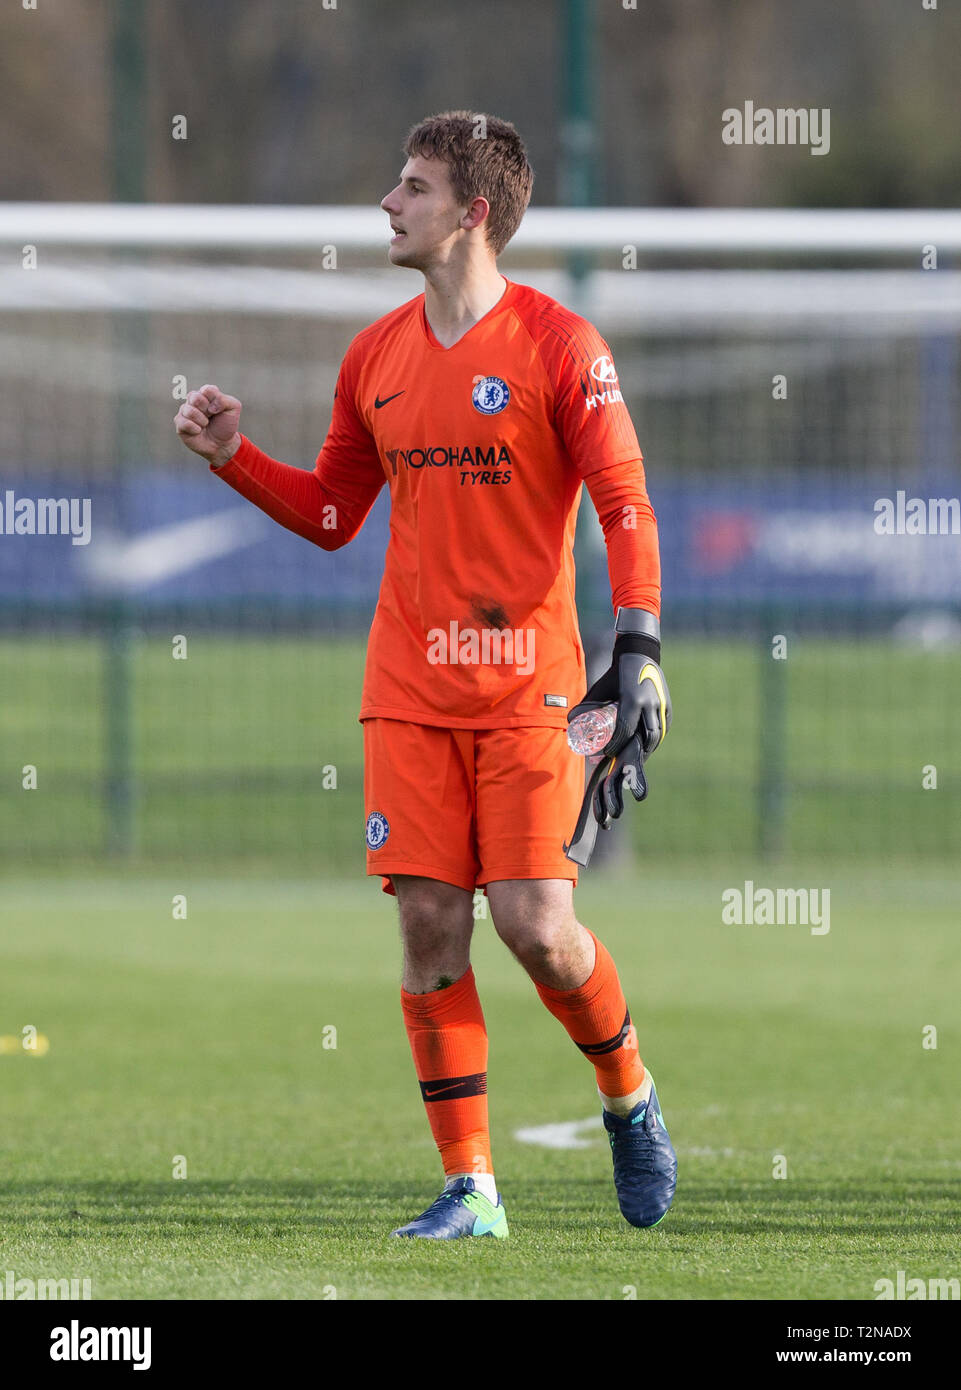 London, UK. 03rd Apr, 2019. Goalkeeper Karlo Zier of Chelsea during the UEFA Youth League Quarter Final match between Chelsea U19 and Dinamo Zagreb U19 at Stamford Bridge, London, England on 3 April 2019. Photo by Andy Rowland. Credit: Andrew Rowland/Alamy Live News Stock Photo